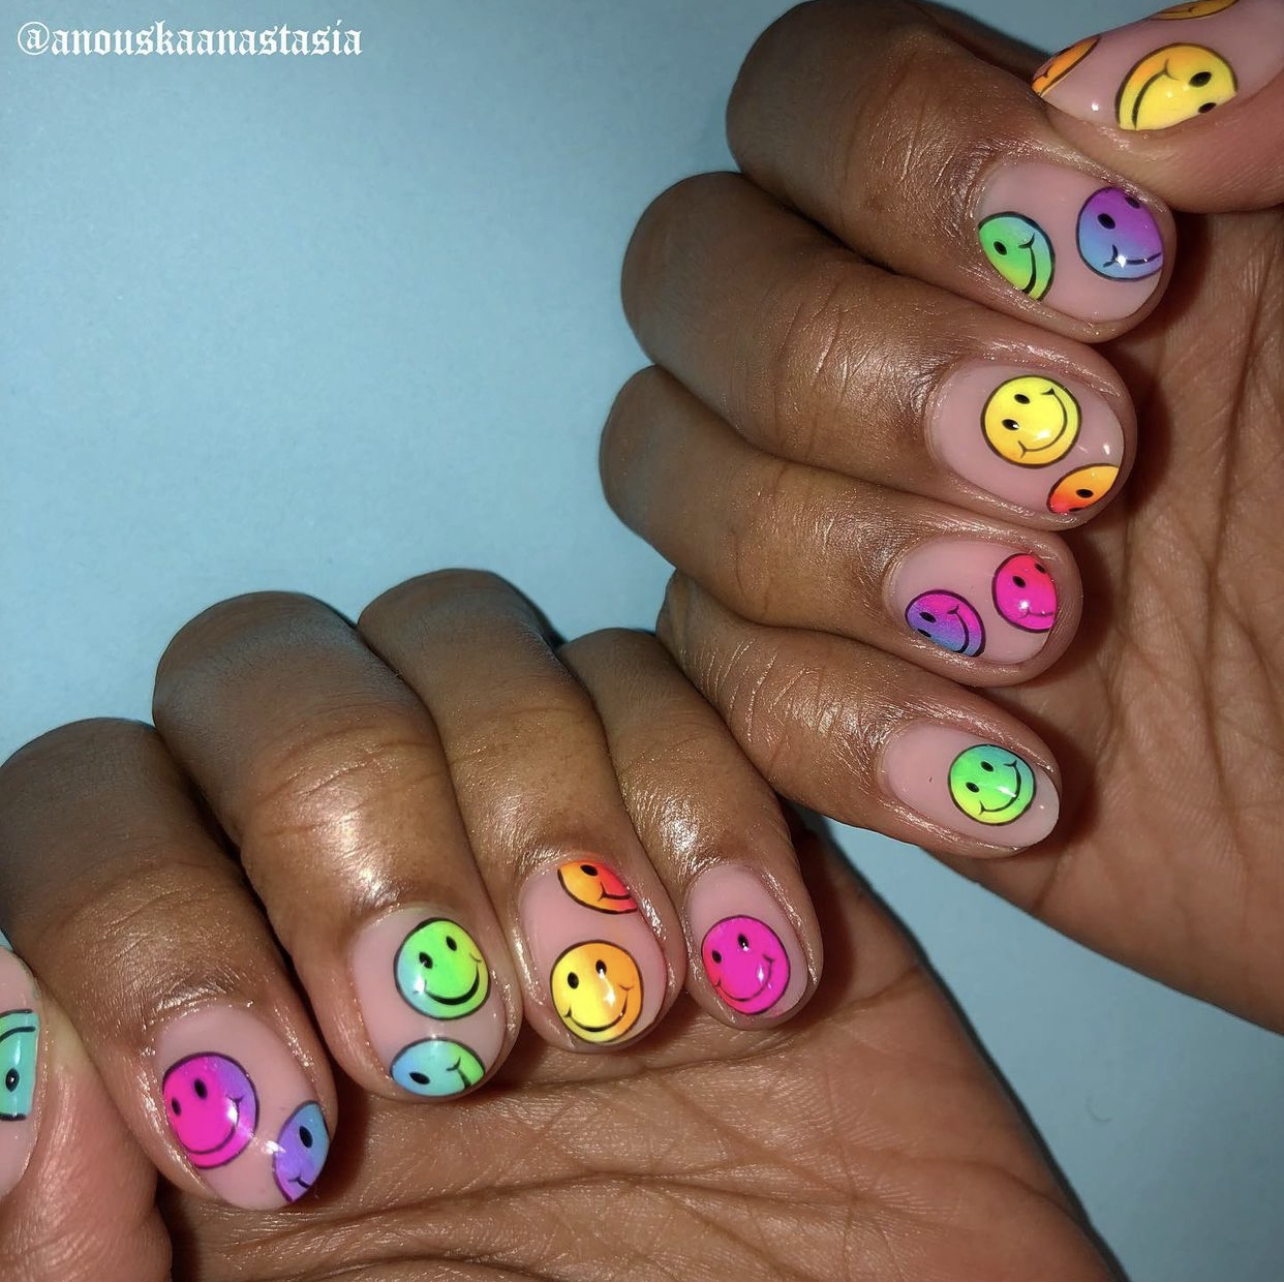 nails with smiley faces